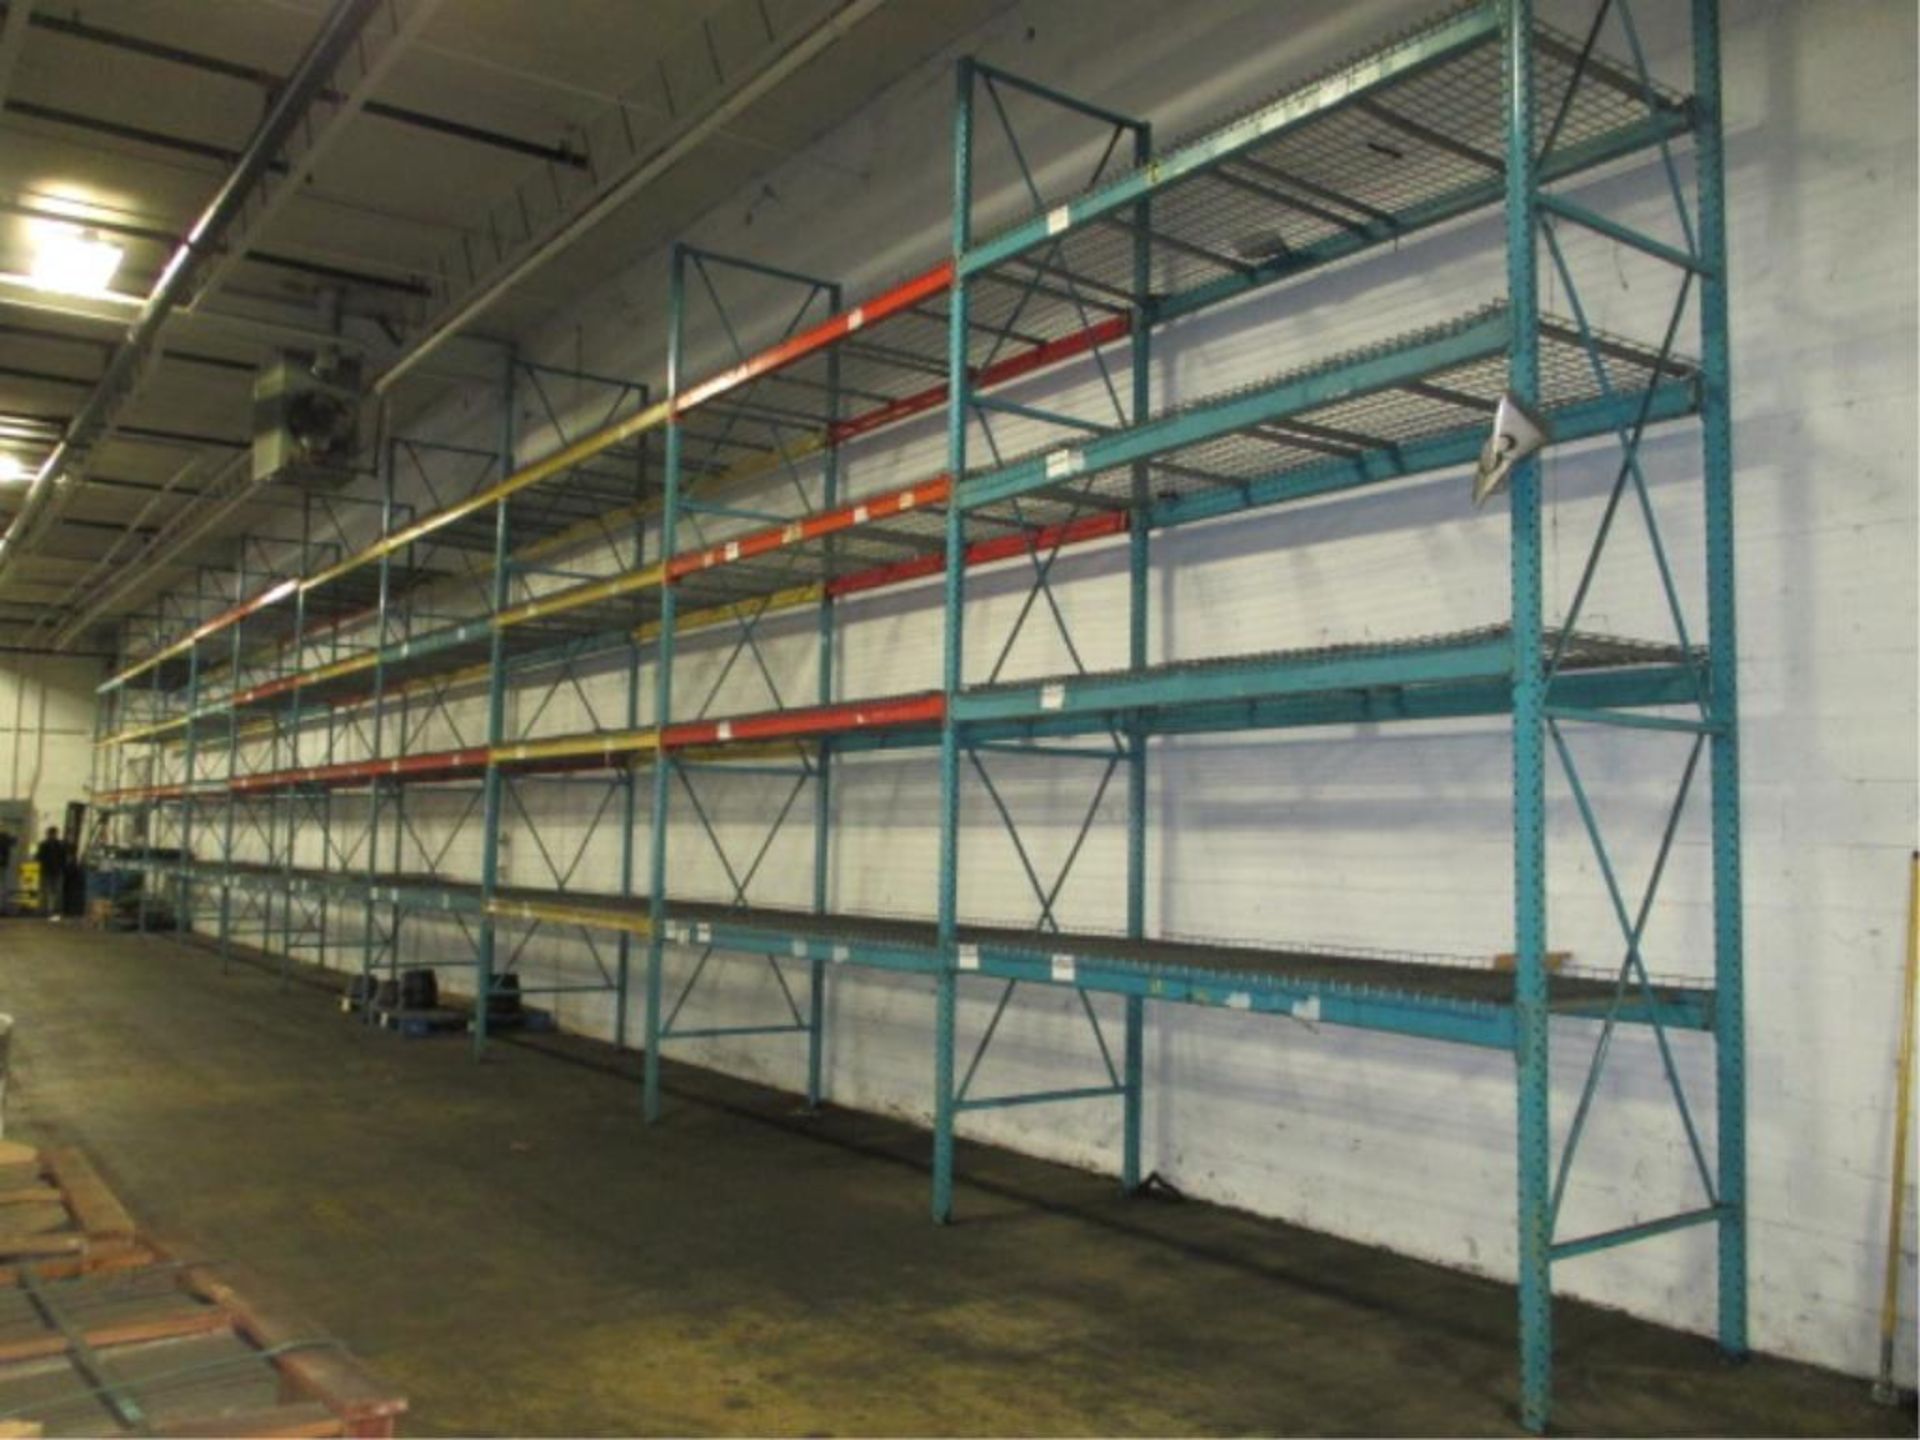 Lot: (4 Tier, 10 sections) Warehouse Pallet Racking, Redirack Style. Consisting of: (11) Upright